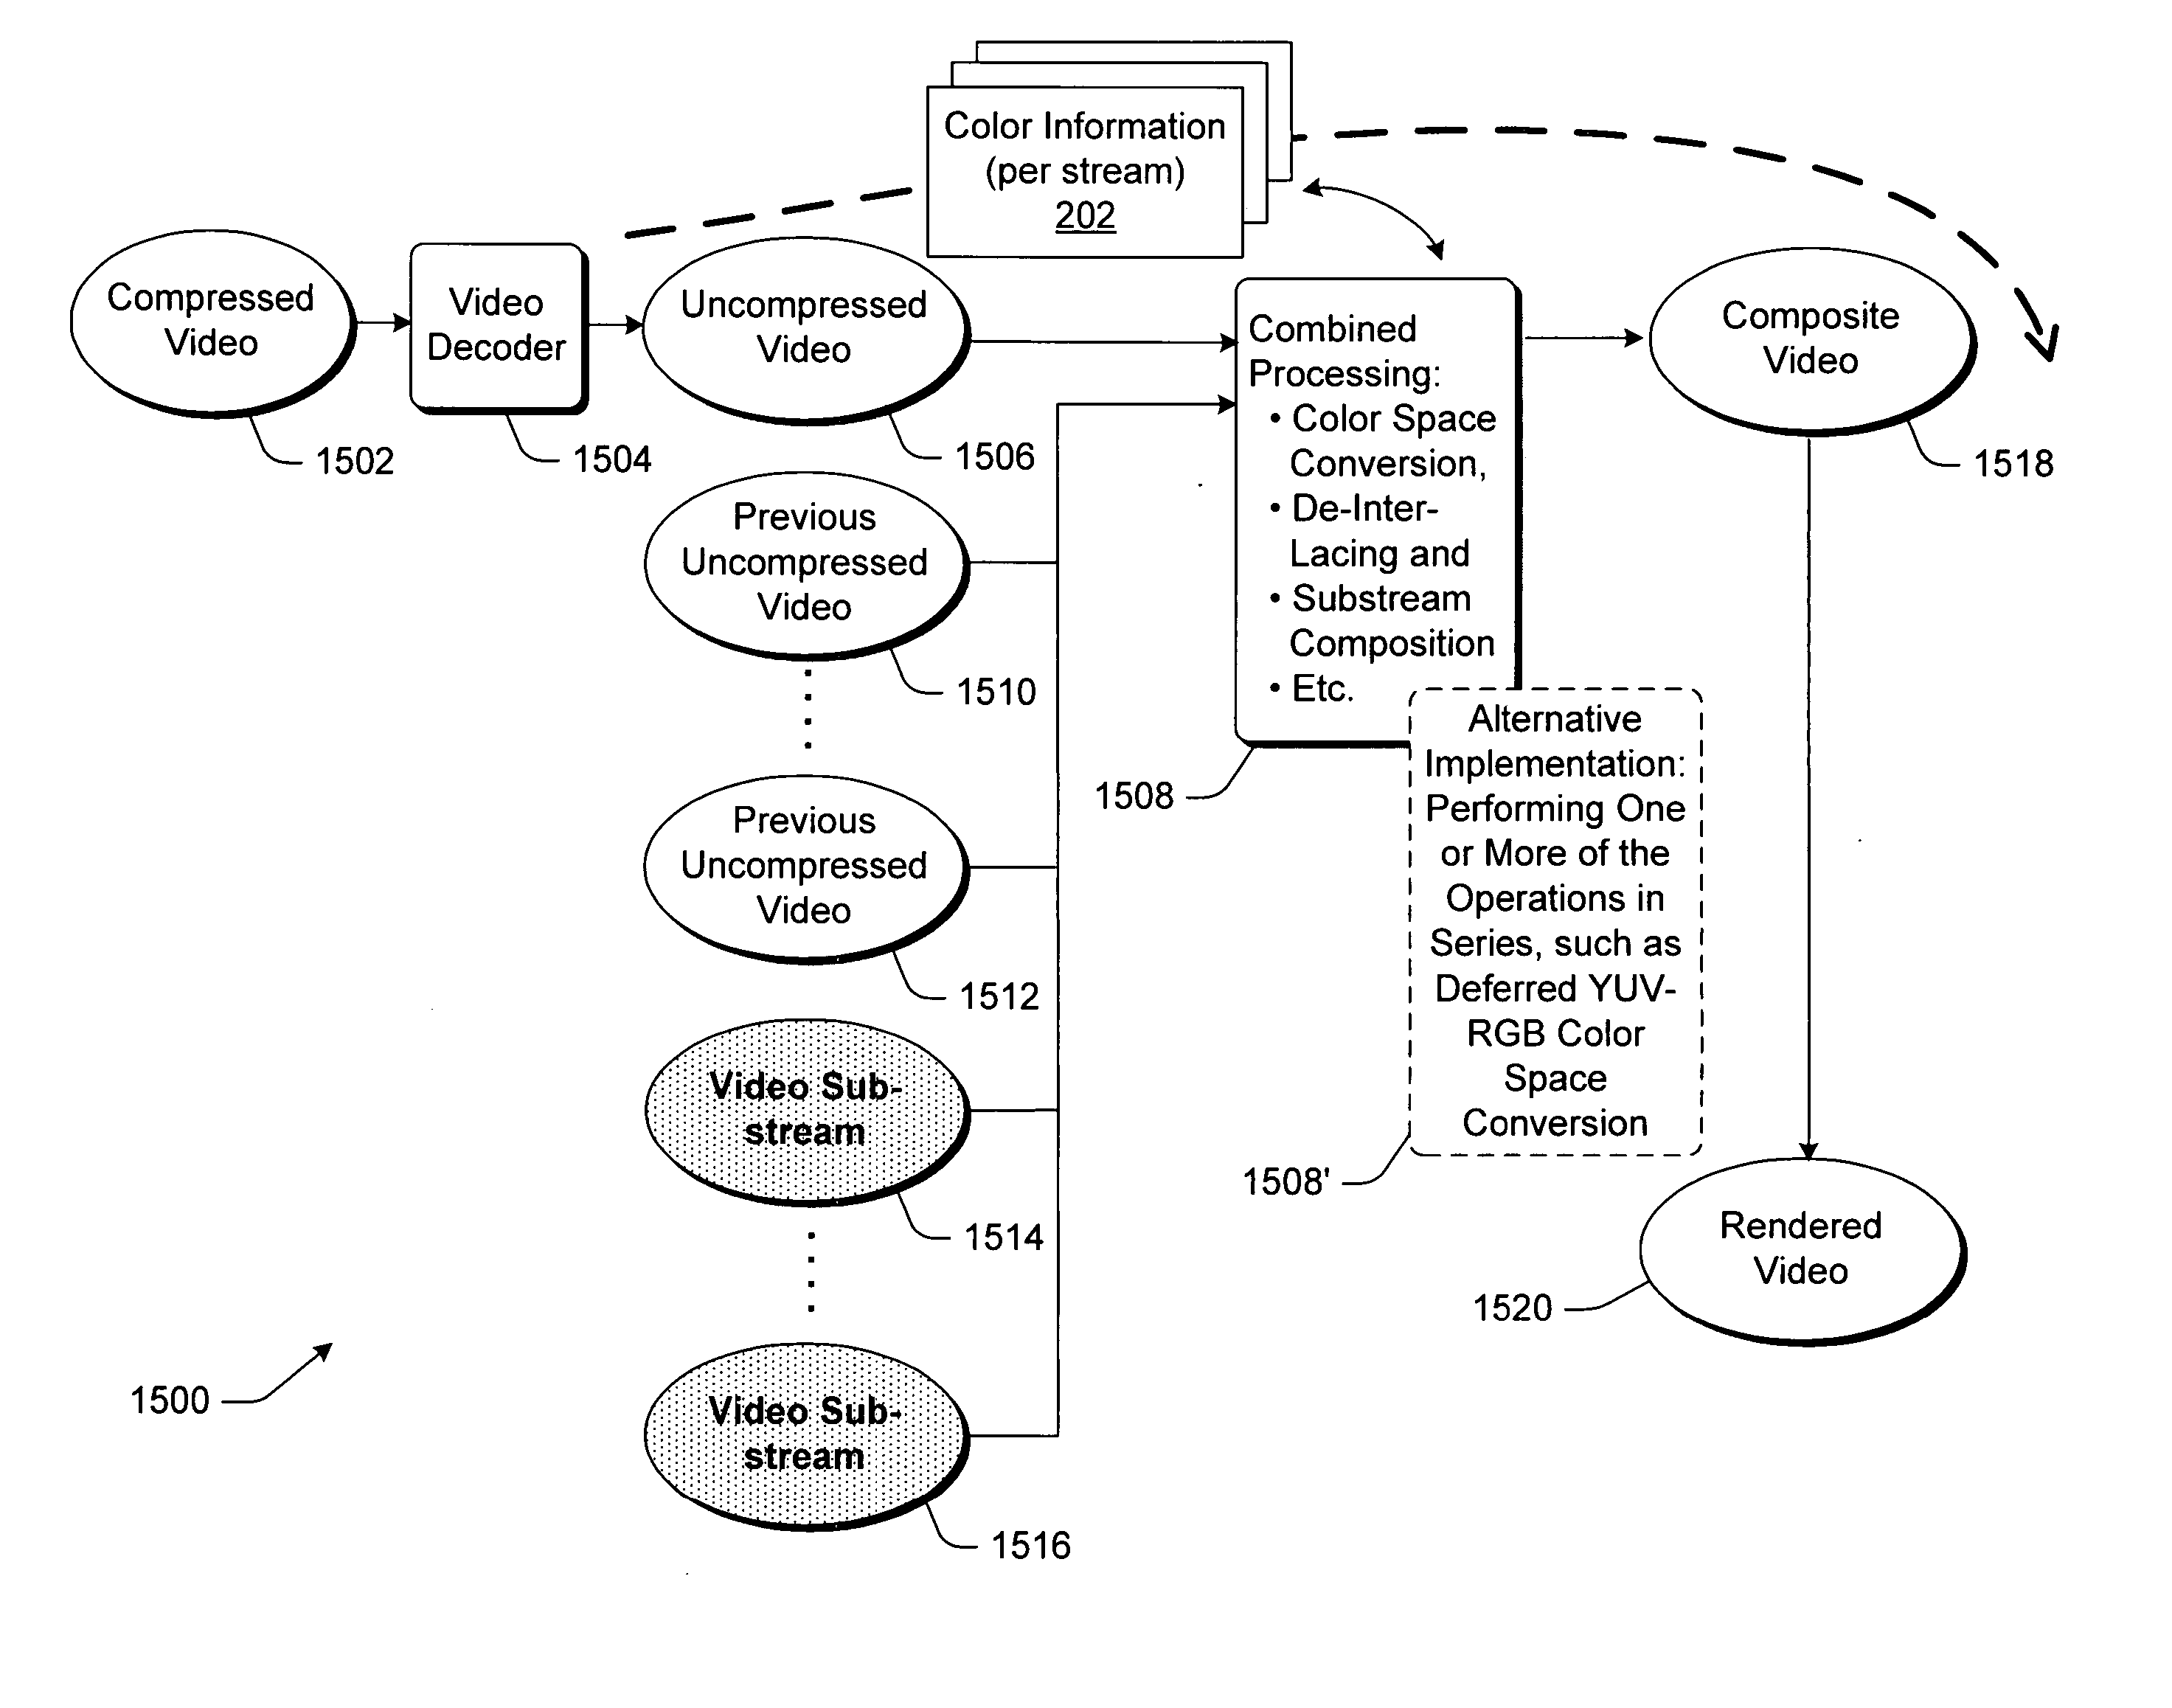 Strategies for processing image information using a color information data structure